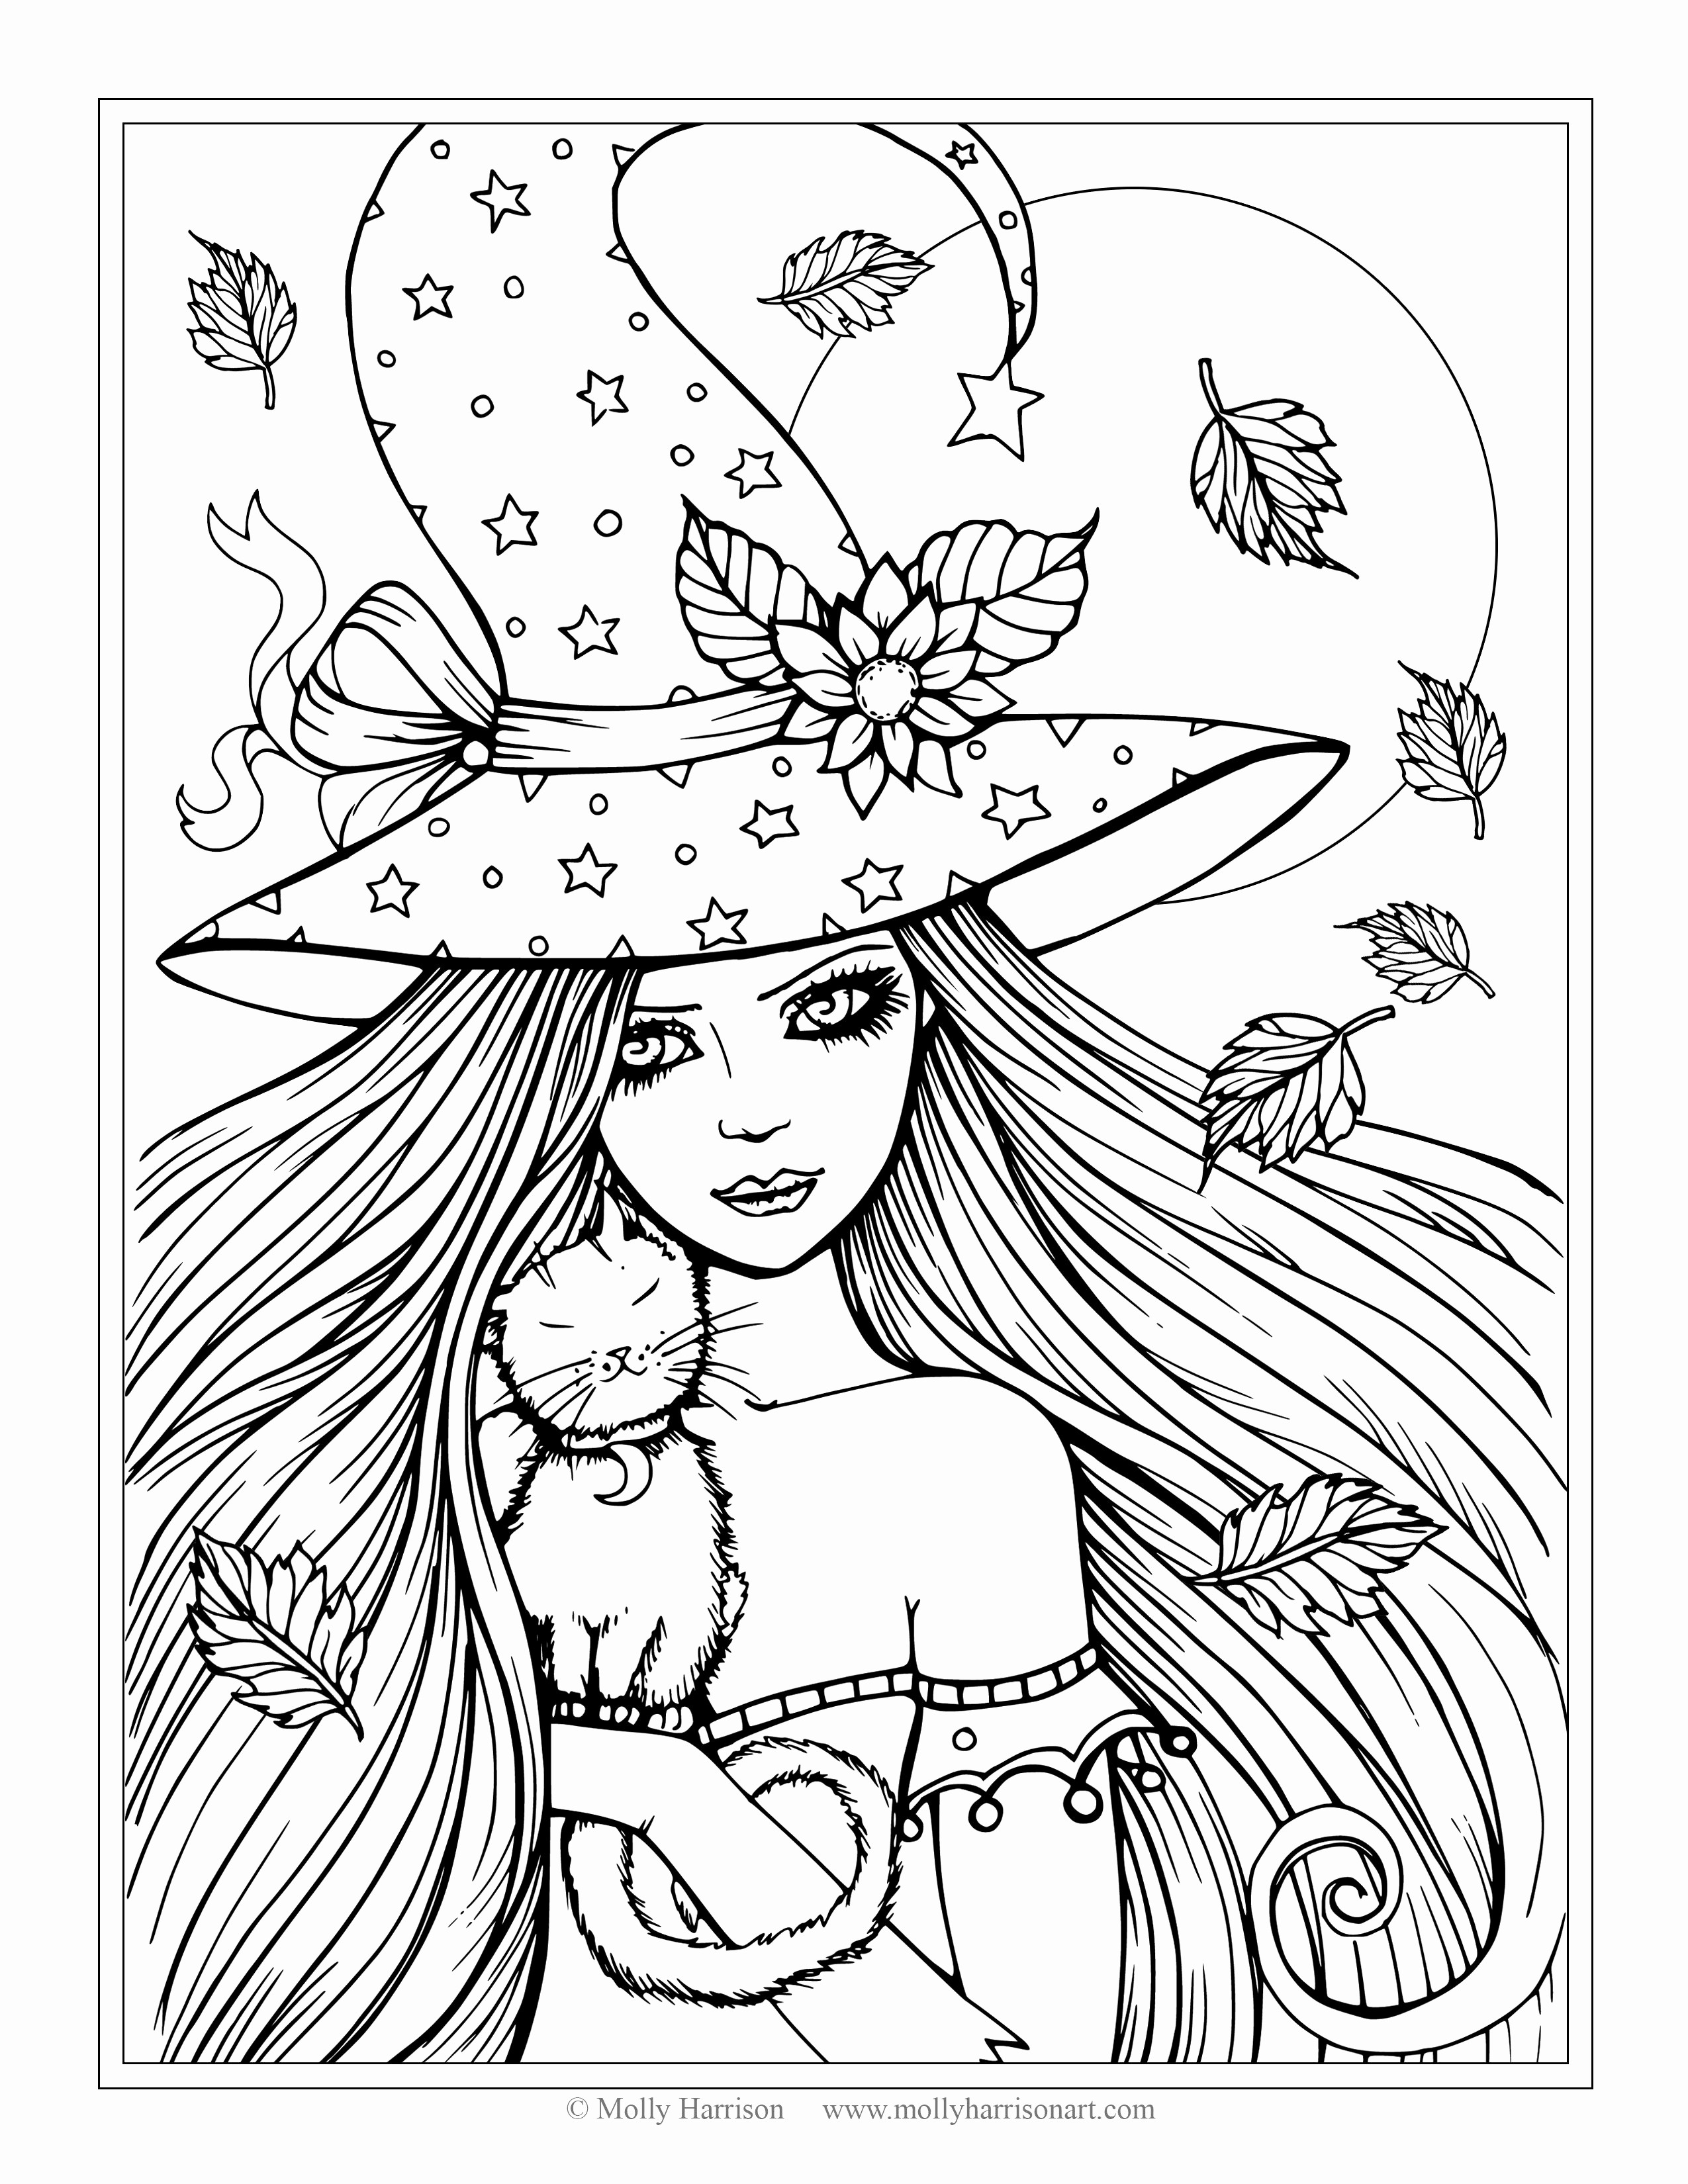 21 Lovable Peacock Feathers In Vase 2024 free download peacock feathers in vase of free printable abstract coloring pages for adults free kids coloring pertaining to free printable abstract coloring pages for adults free kids coloring pages beau